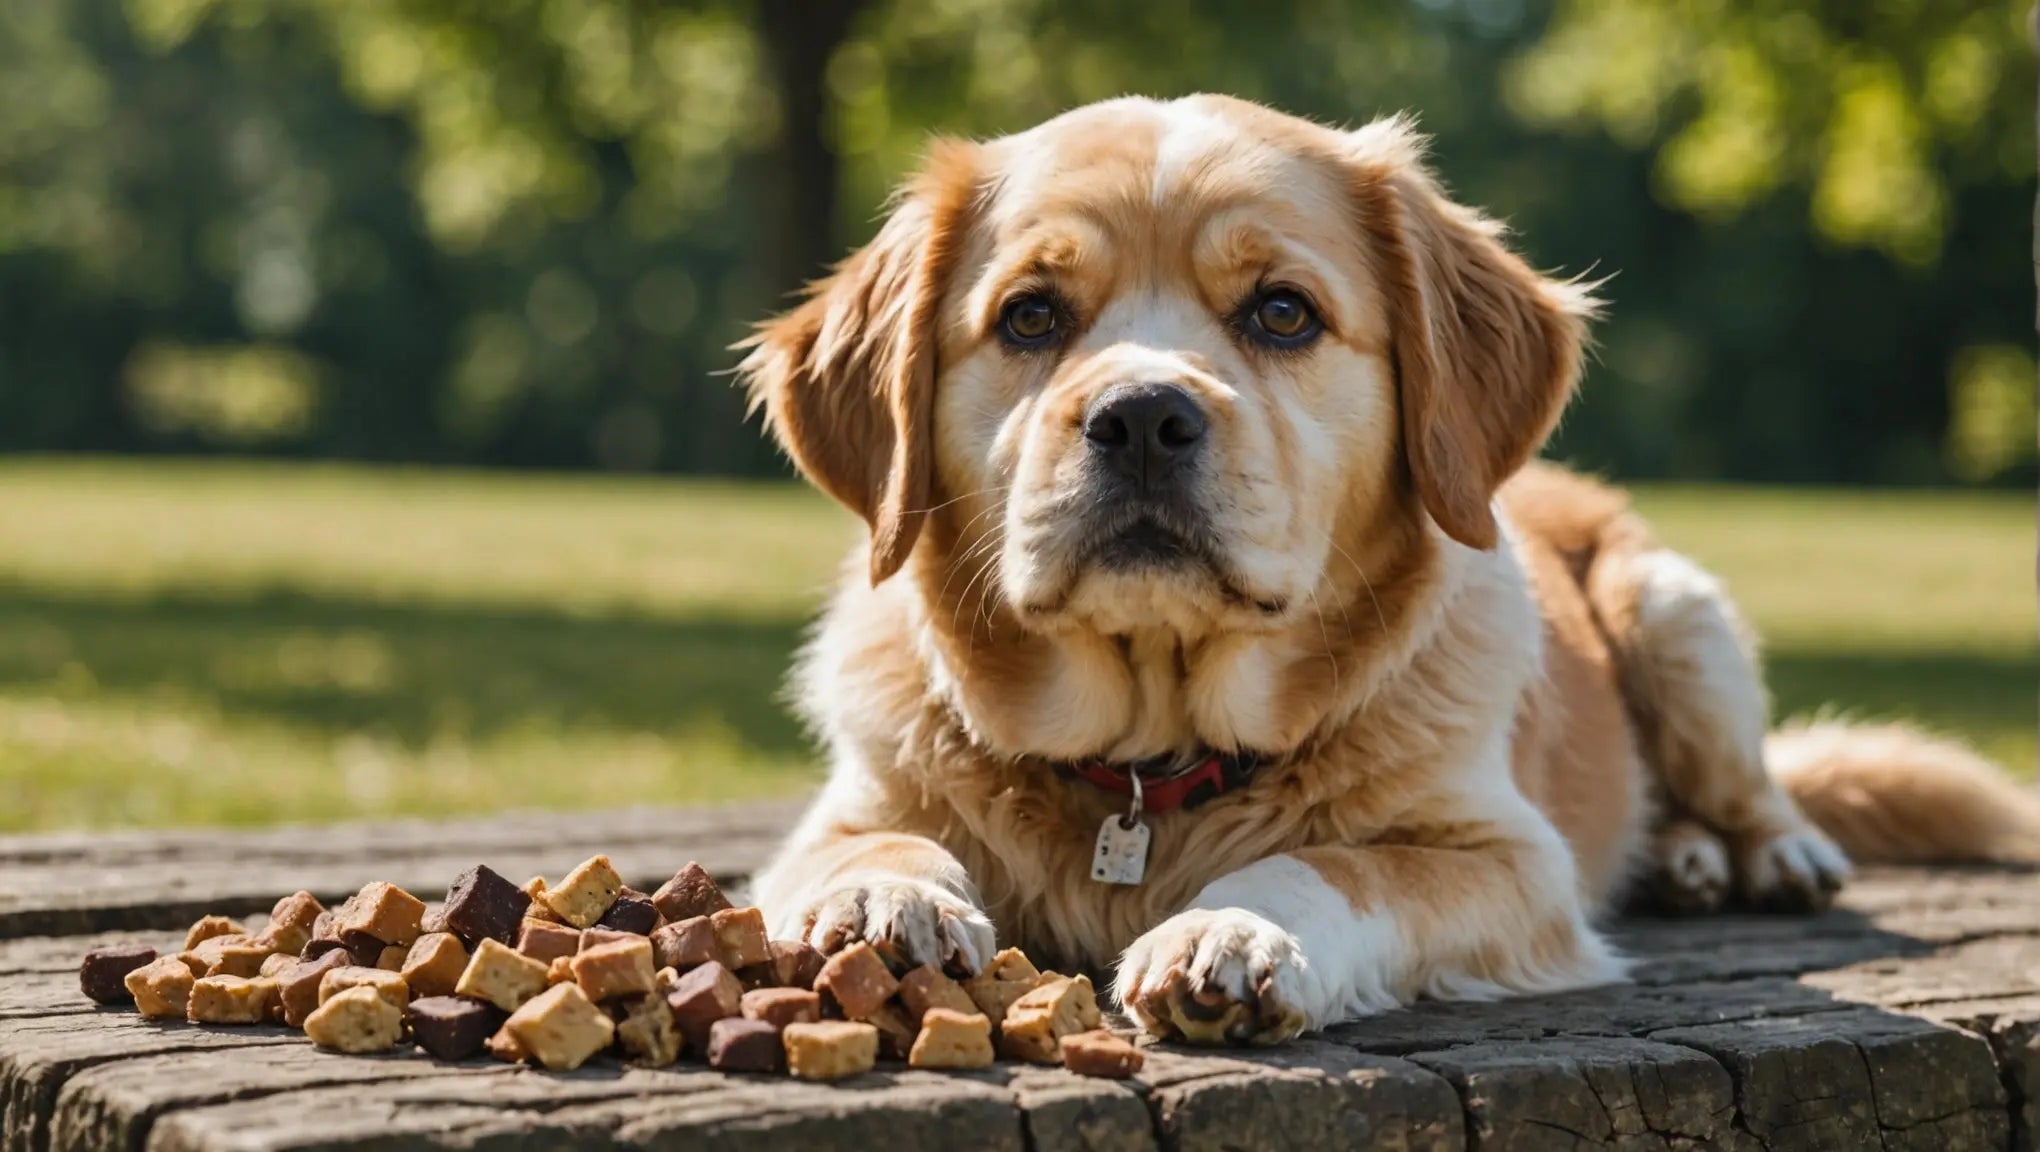 Indulge Your Dog with Premium Natural Treats